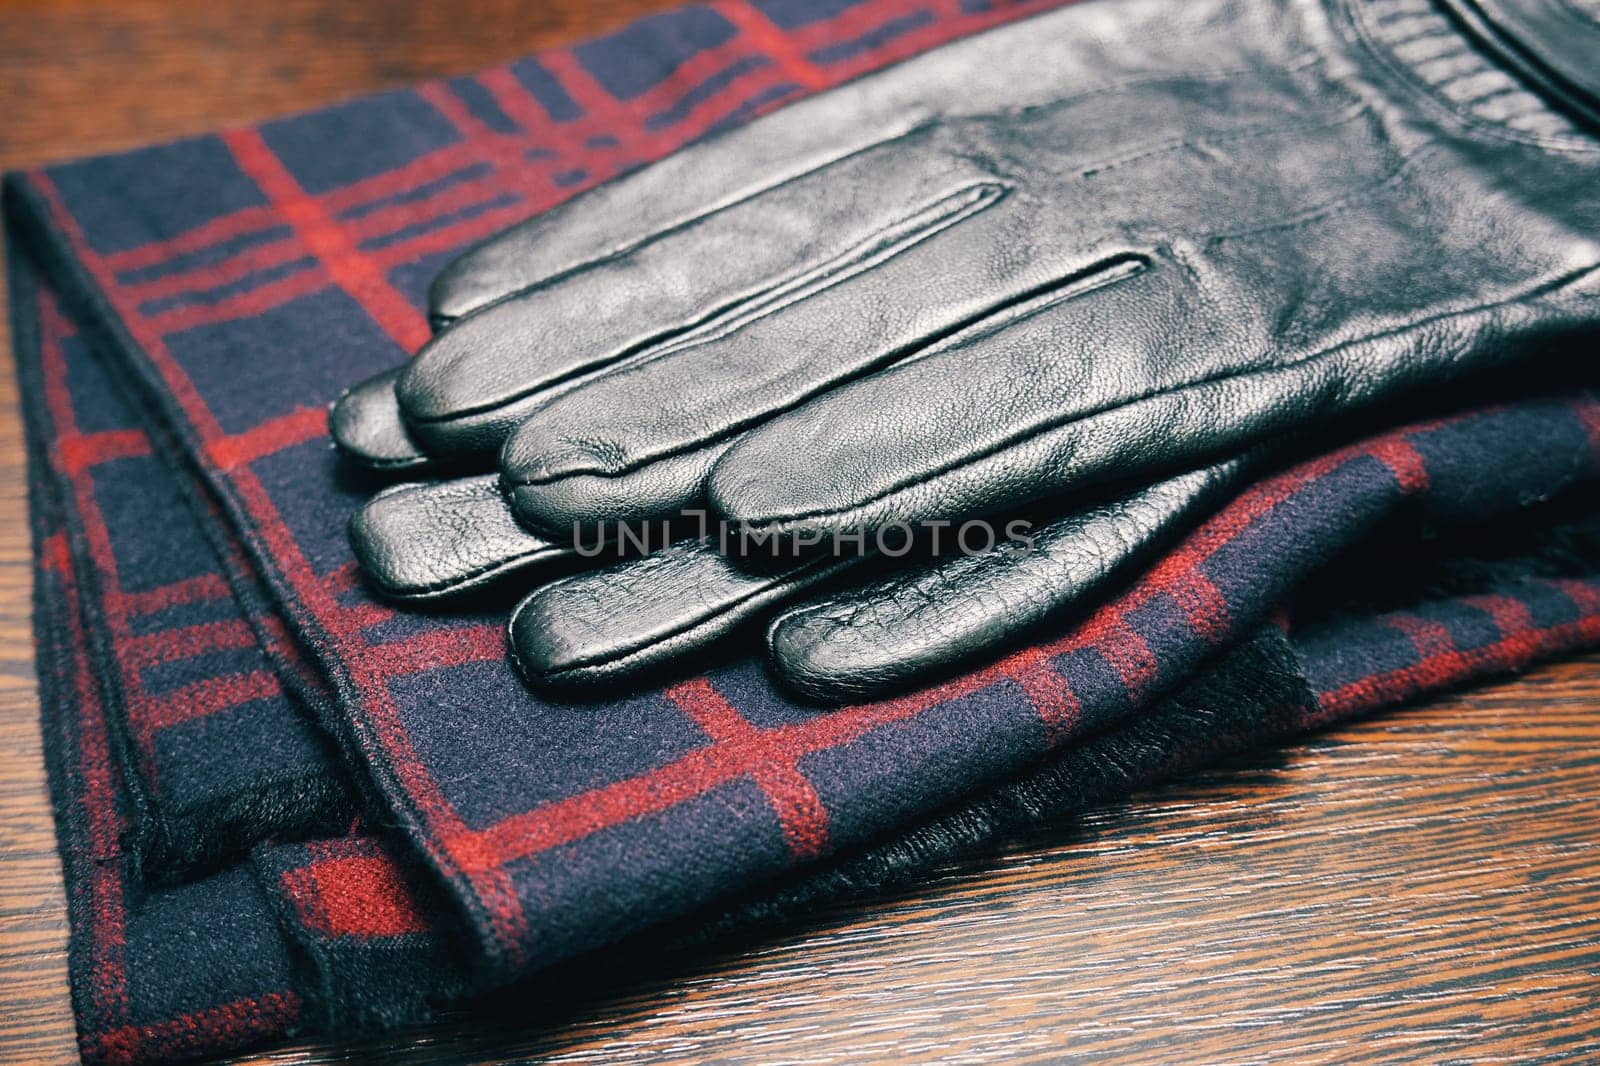 Men's leather gloves and a plaid scarf on a wooden table close-up